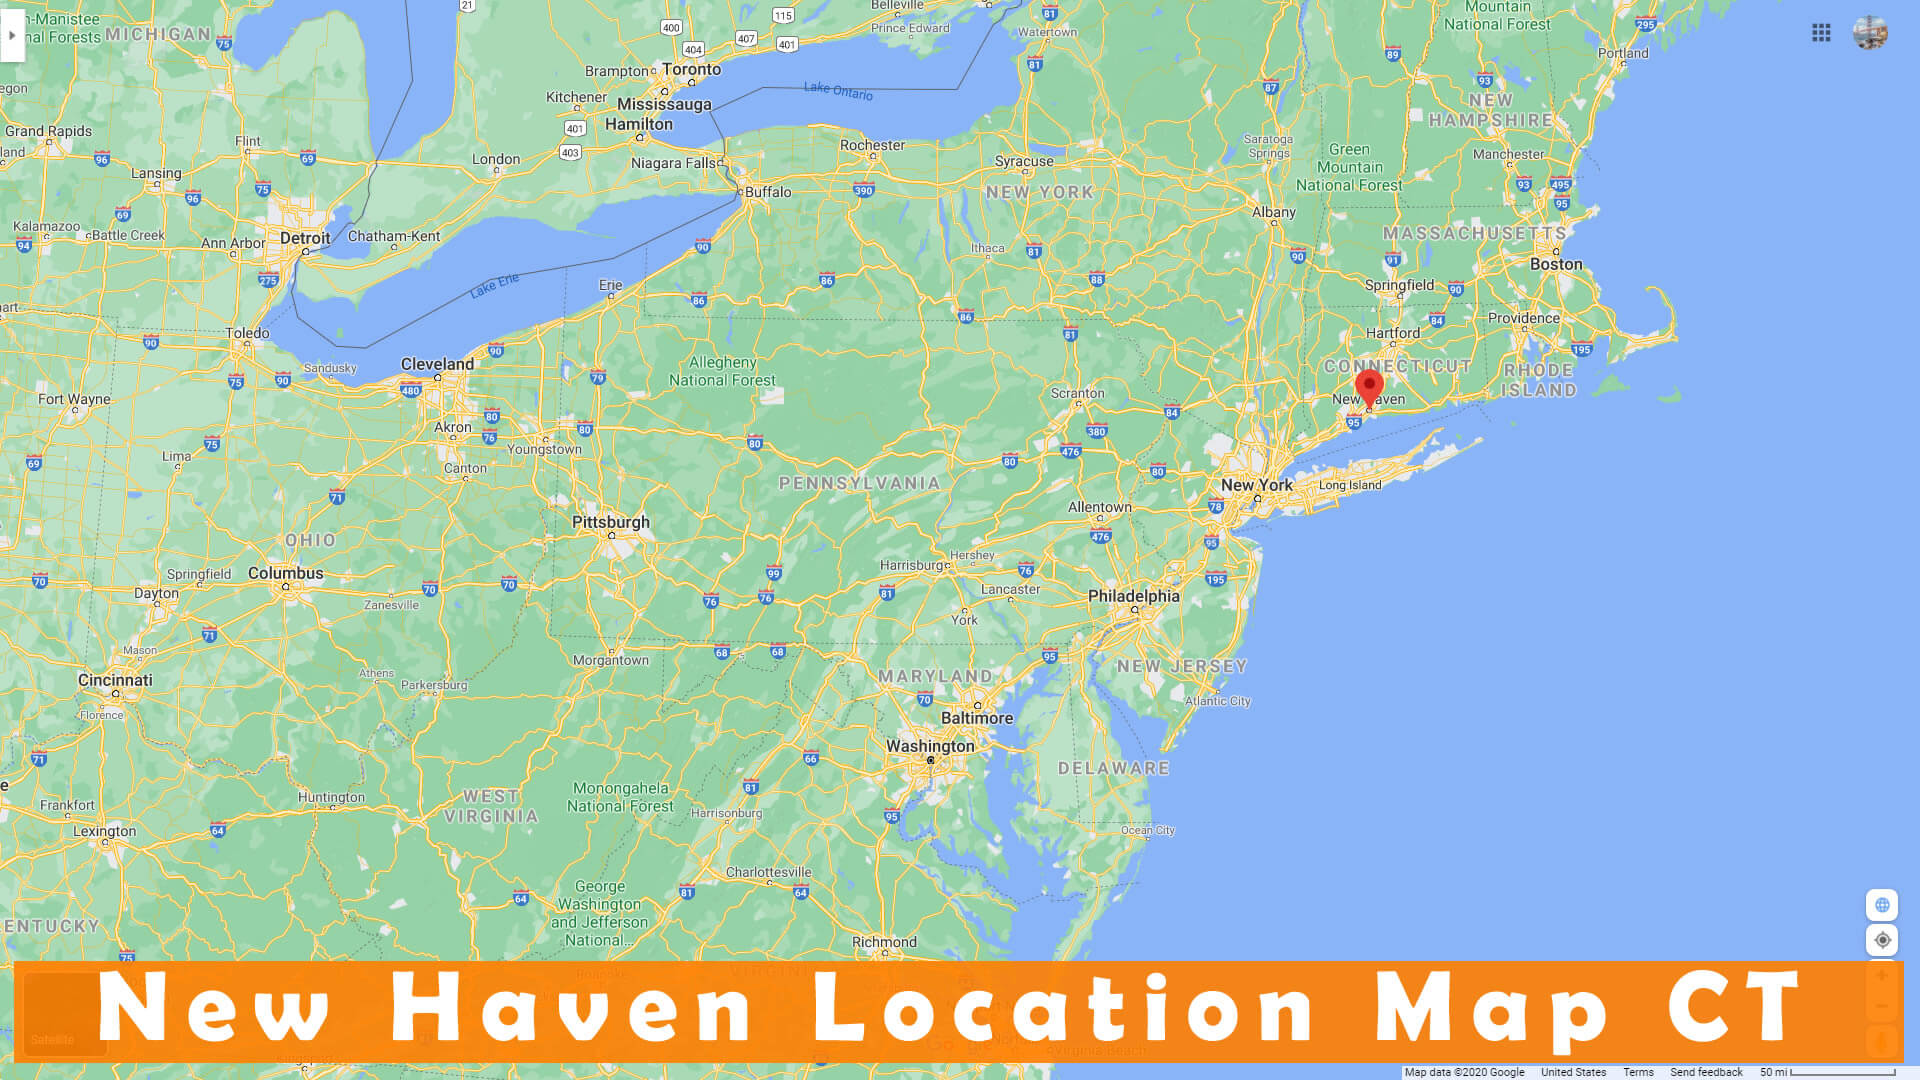 New Haven Location Map CT